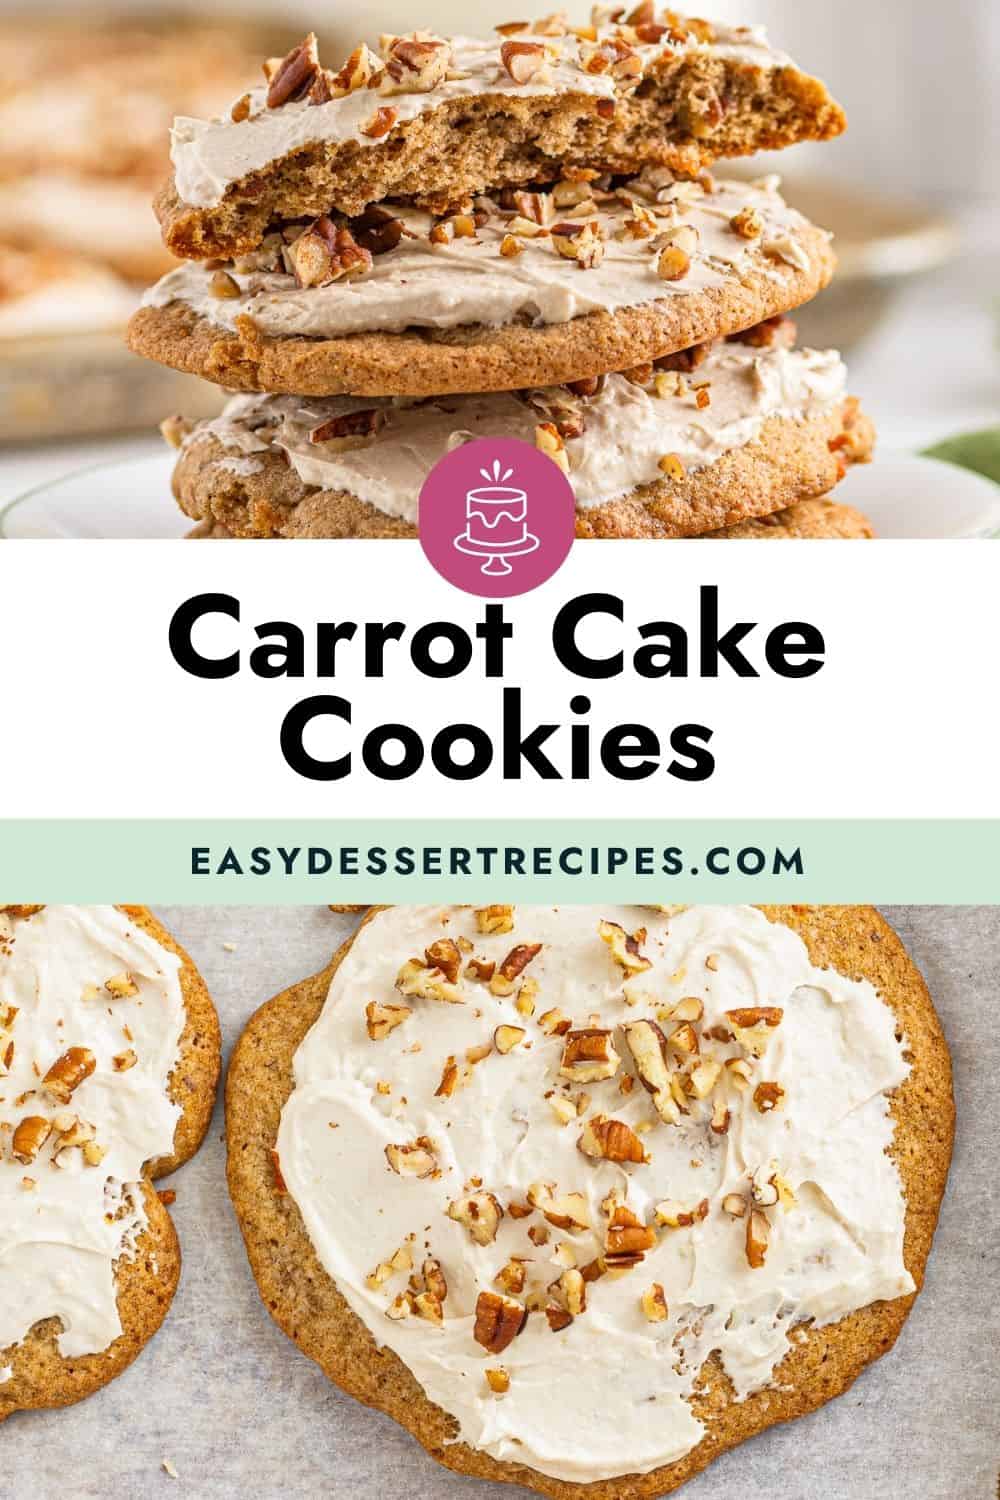 carrot cake cookies are stacked on top of each other.